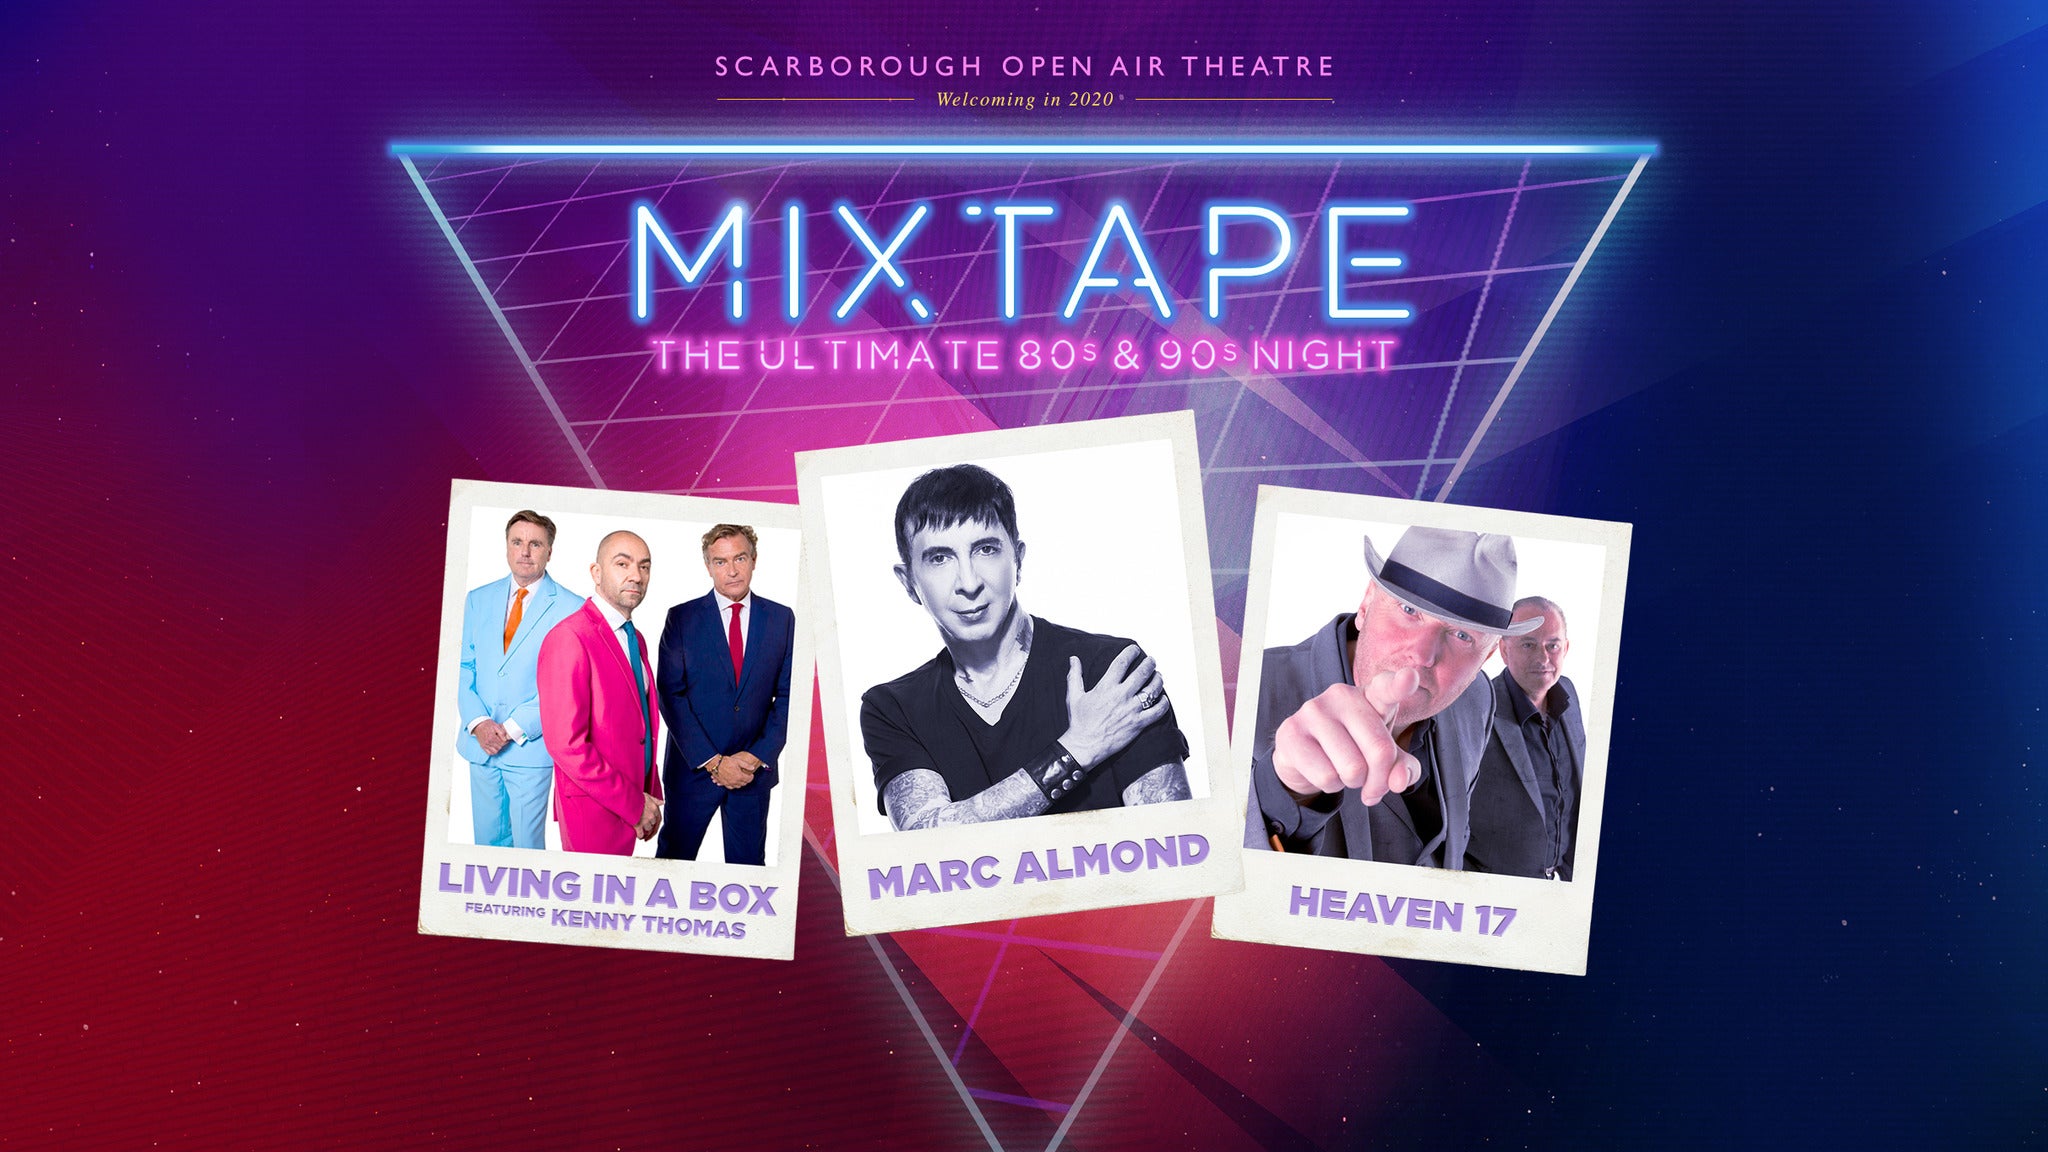 Mixtape - With Marc Almond, Heaven 17 and Living in a Box Event Title Pic